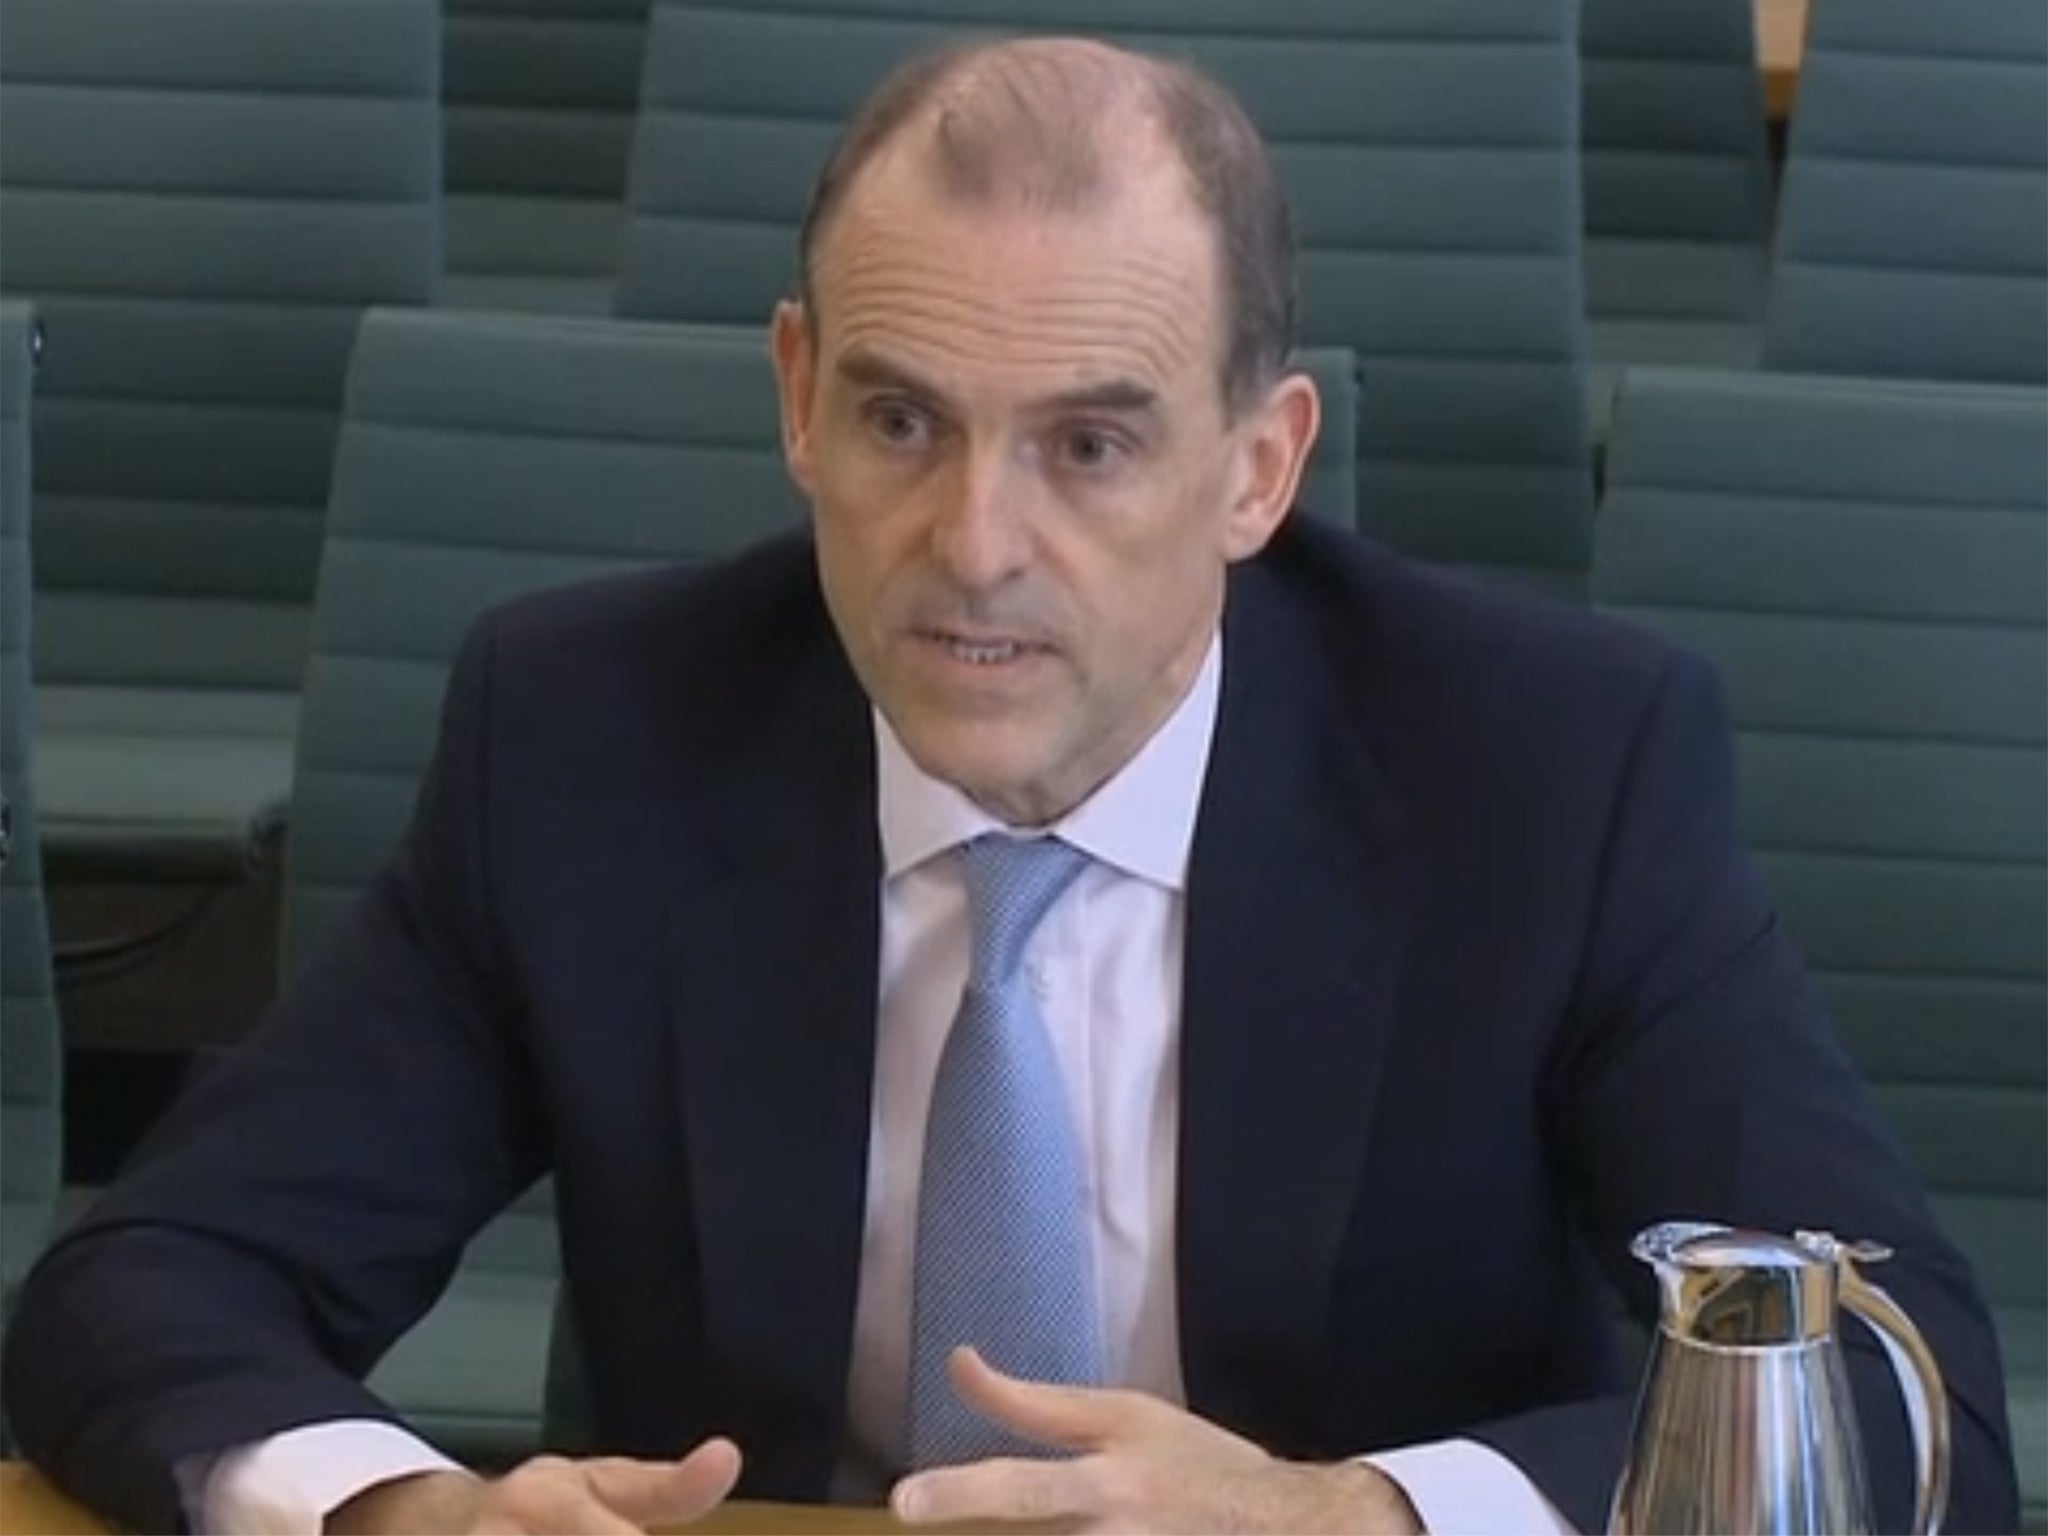 TSB's boss was criticised for his responses to a grilling from MPs last month